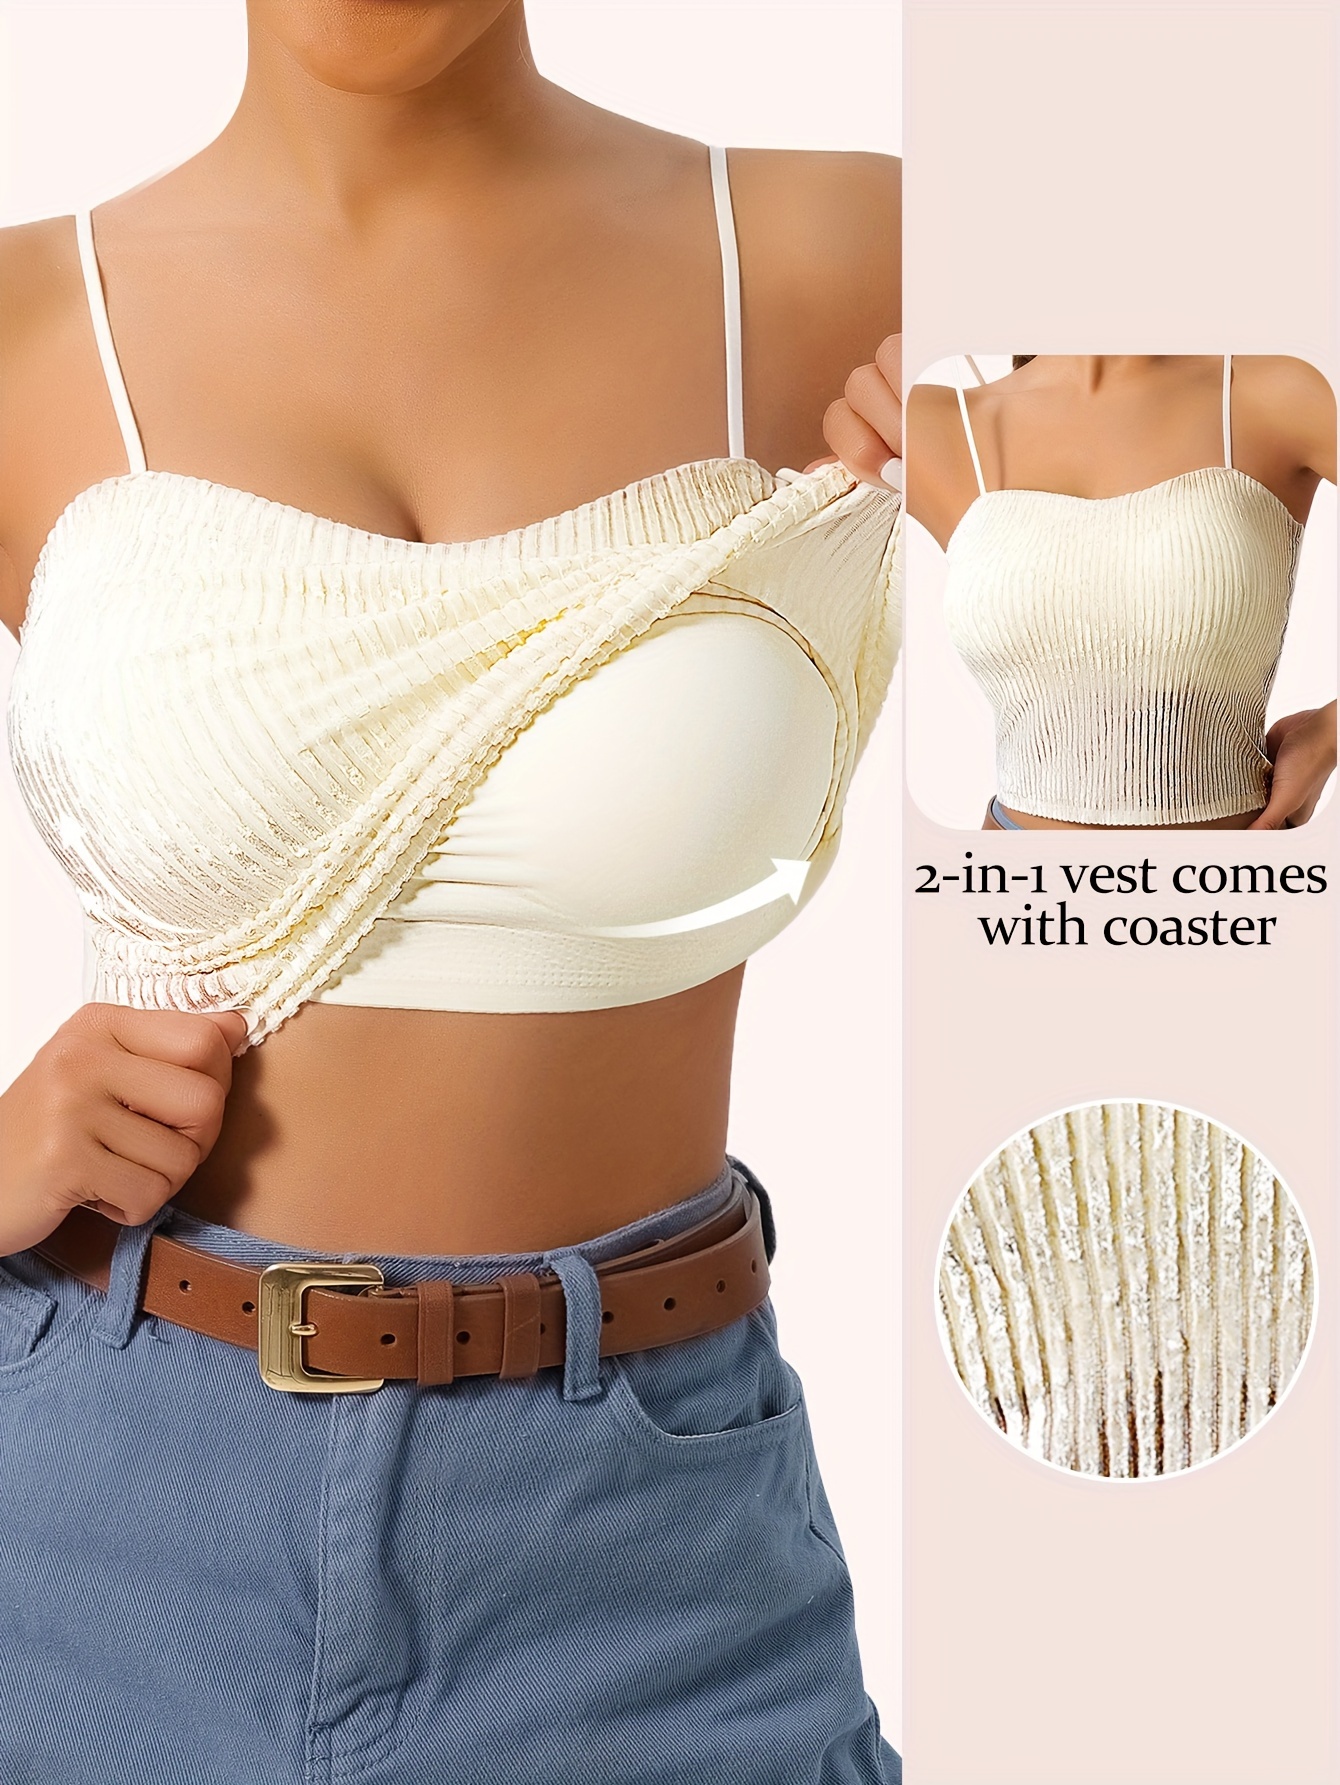 2 In 1 Women's Basic Seamless Camisole Solid Color Spaghetti Straps Slim  Fit Cotton,adjustable Spaghetti Straps Tank Top With Built-in Bra